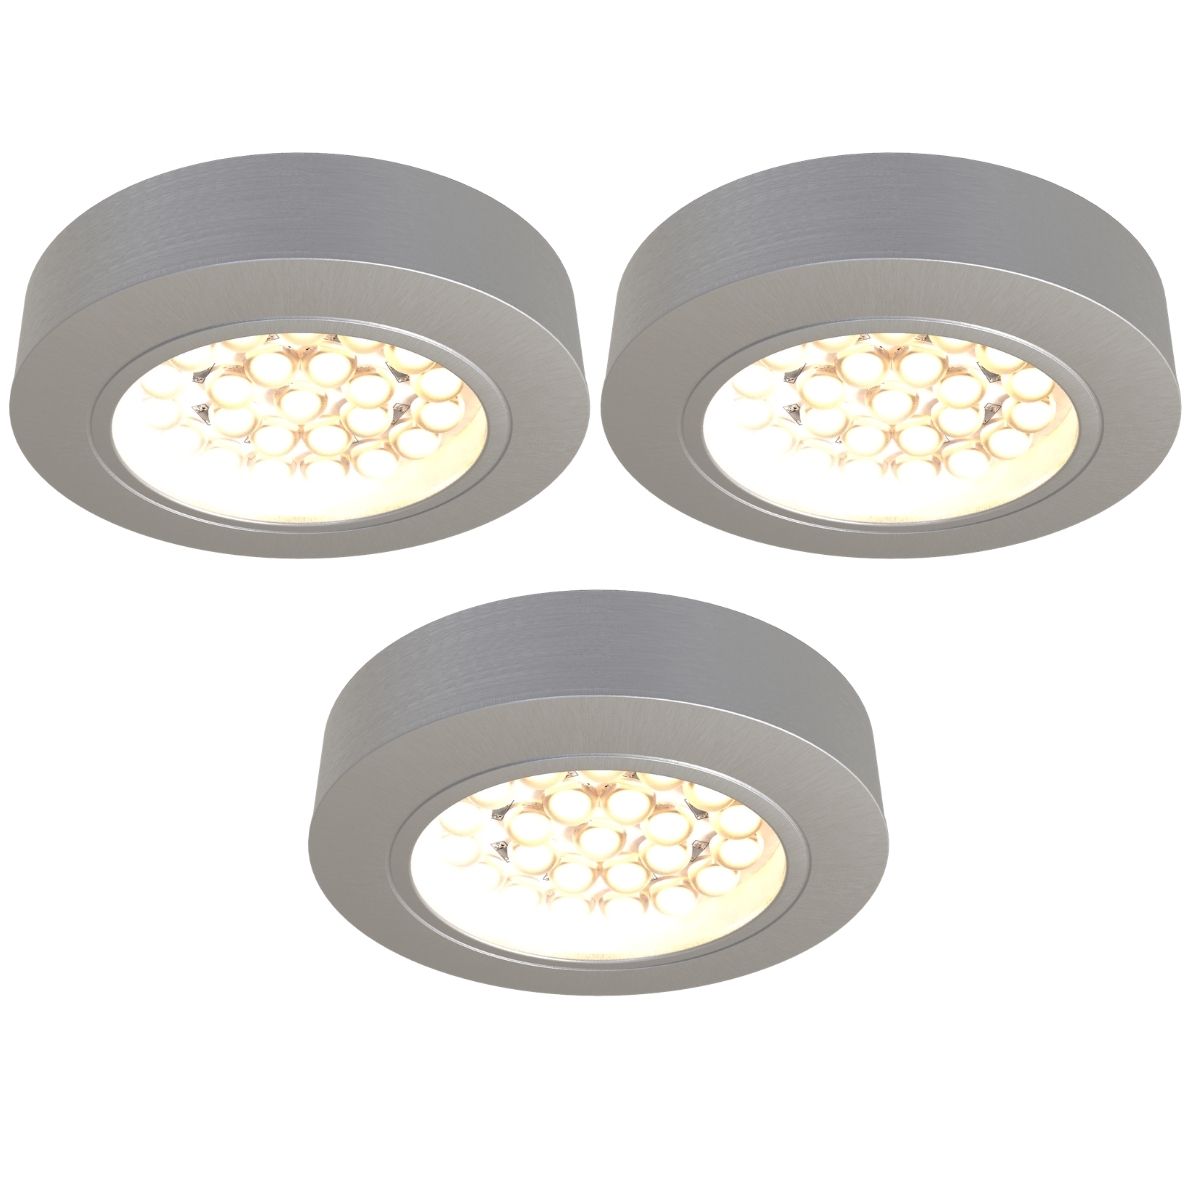 View 3 Pack Surface Mounted Under Cabinet Lights information